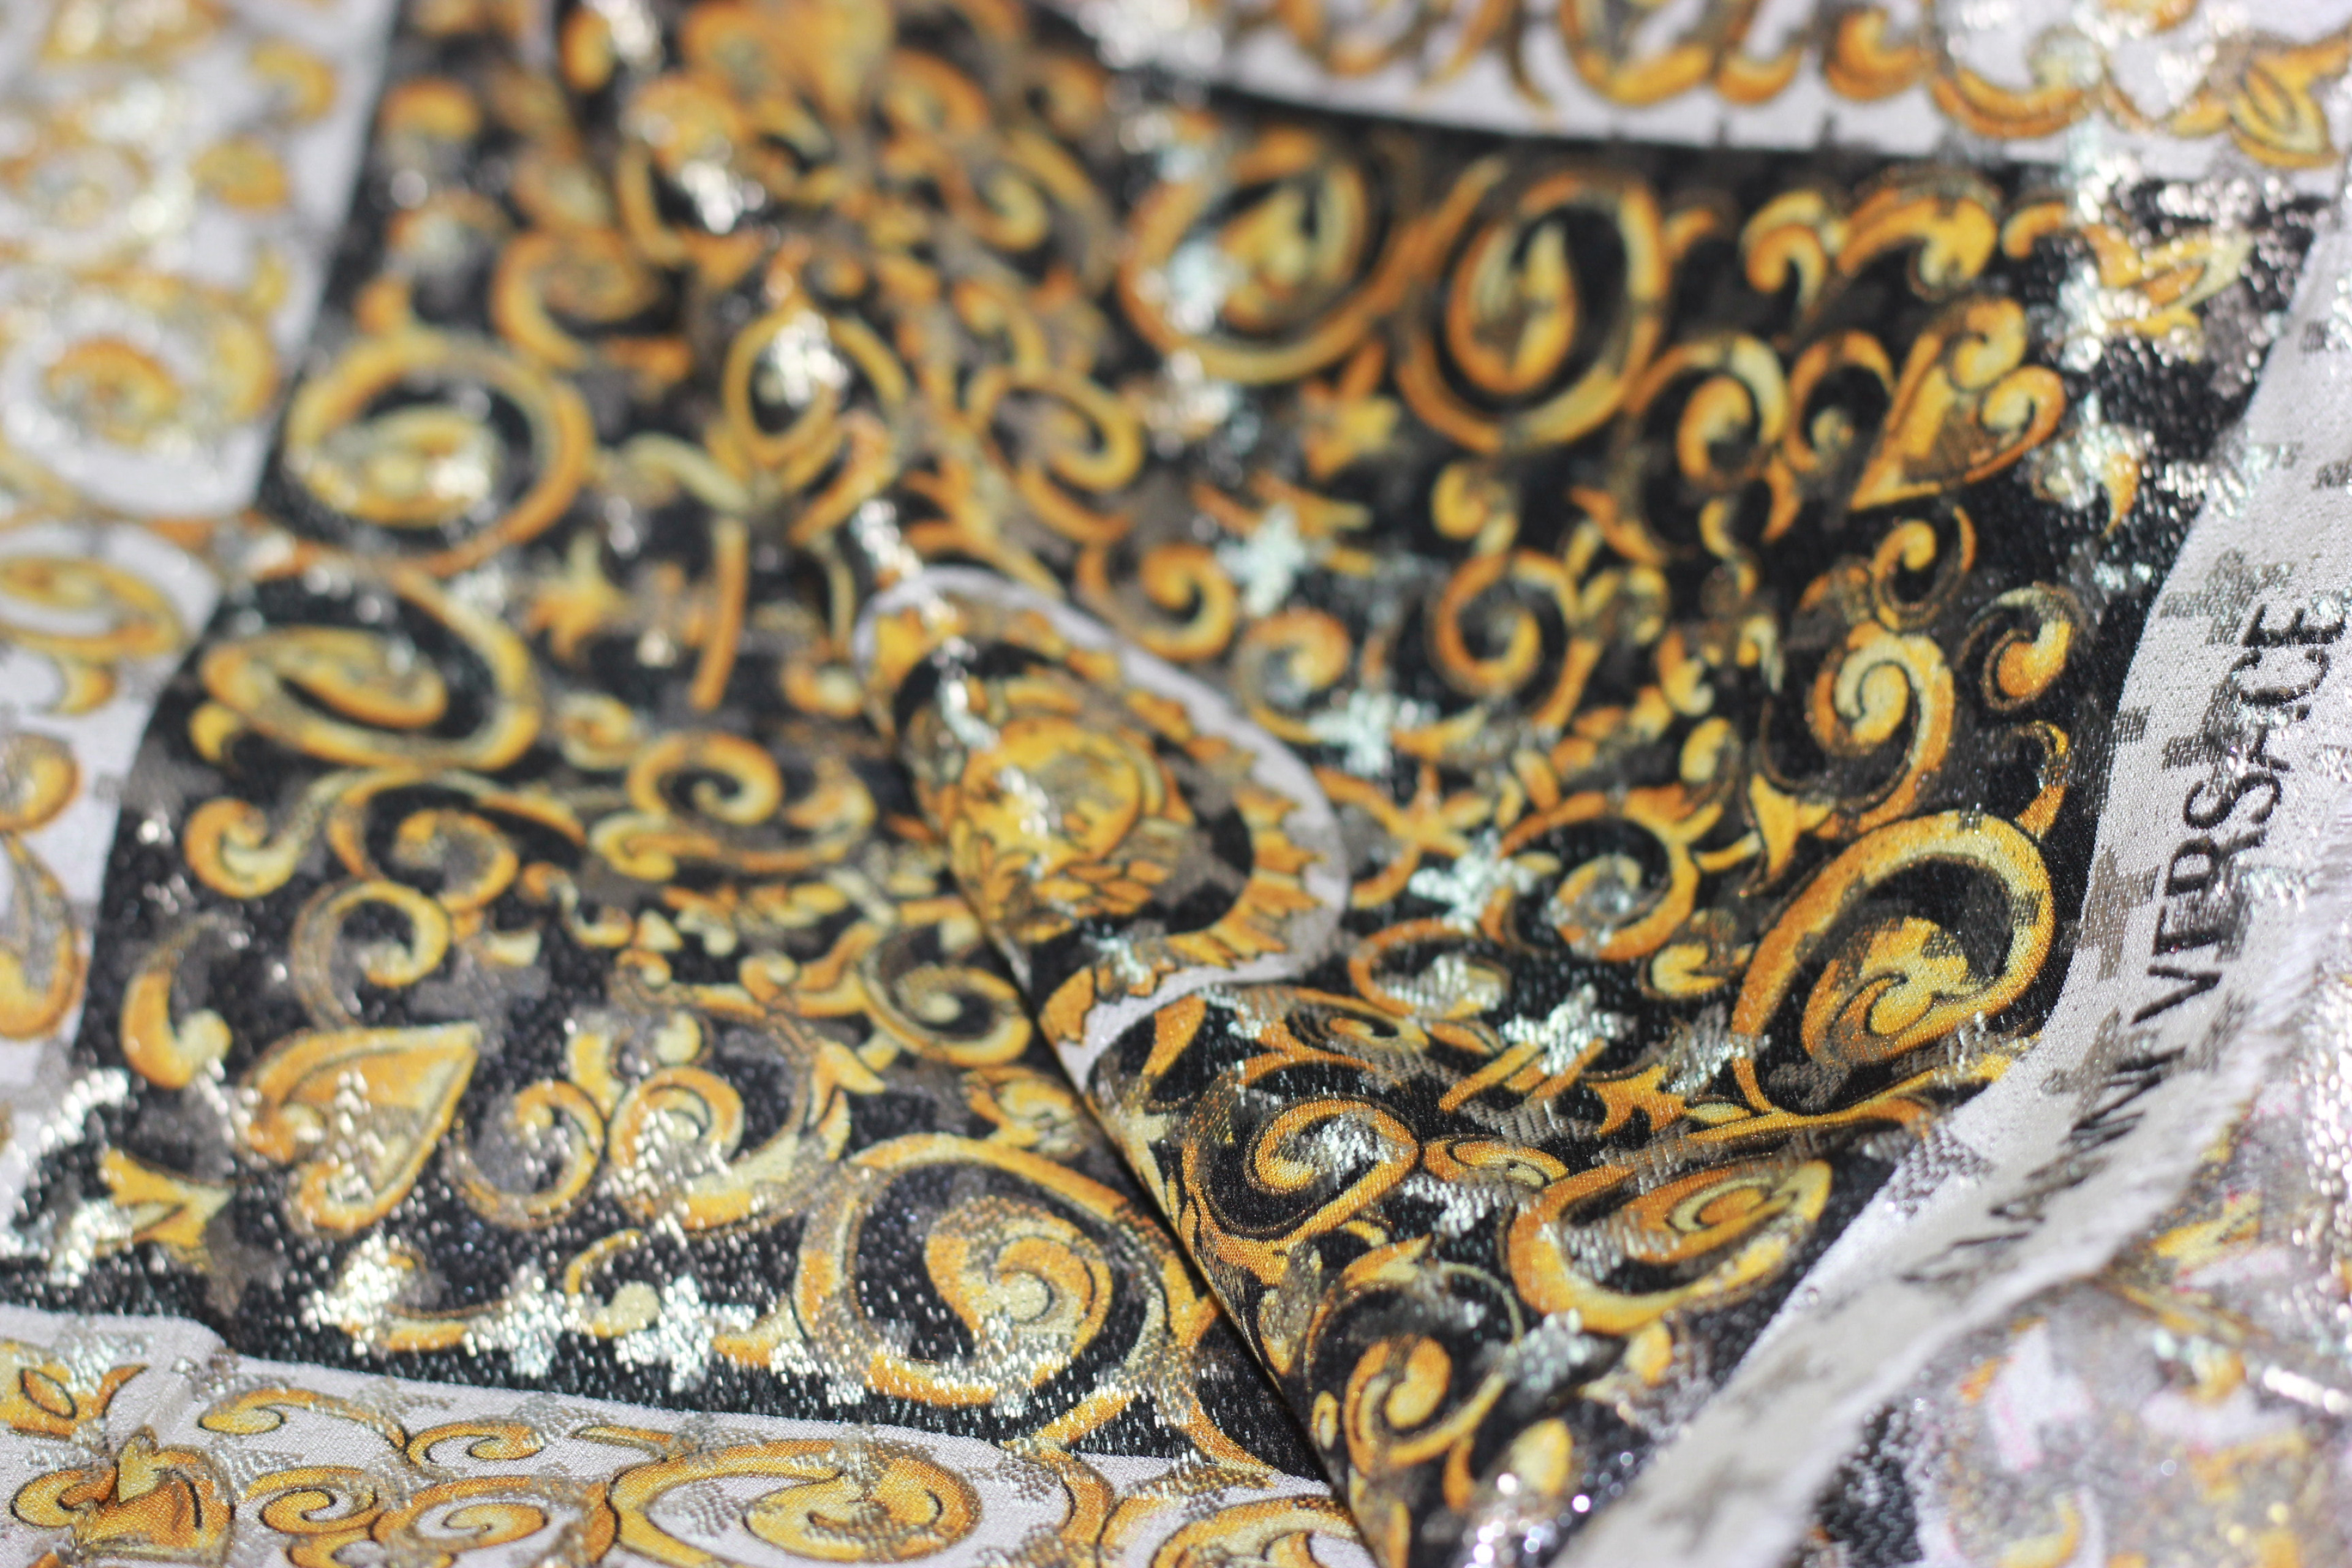 Mood Gold and Black Silk Versace Fabric 1 yard 55” Wide